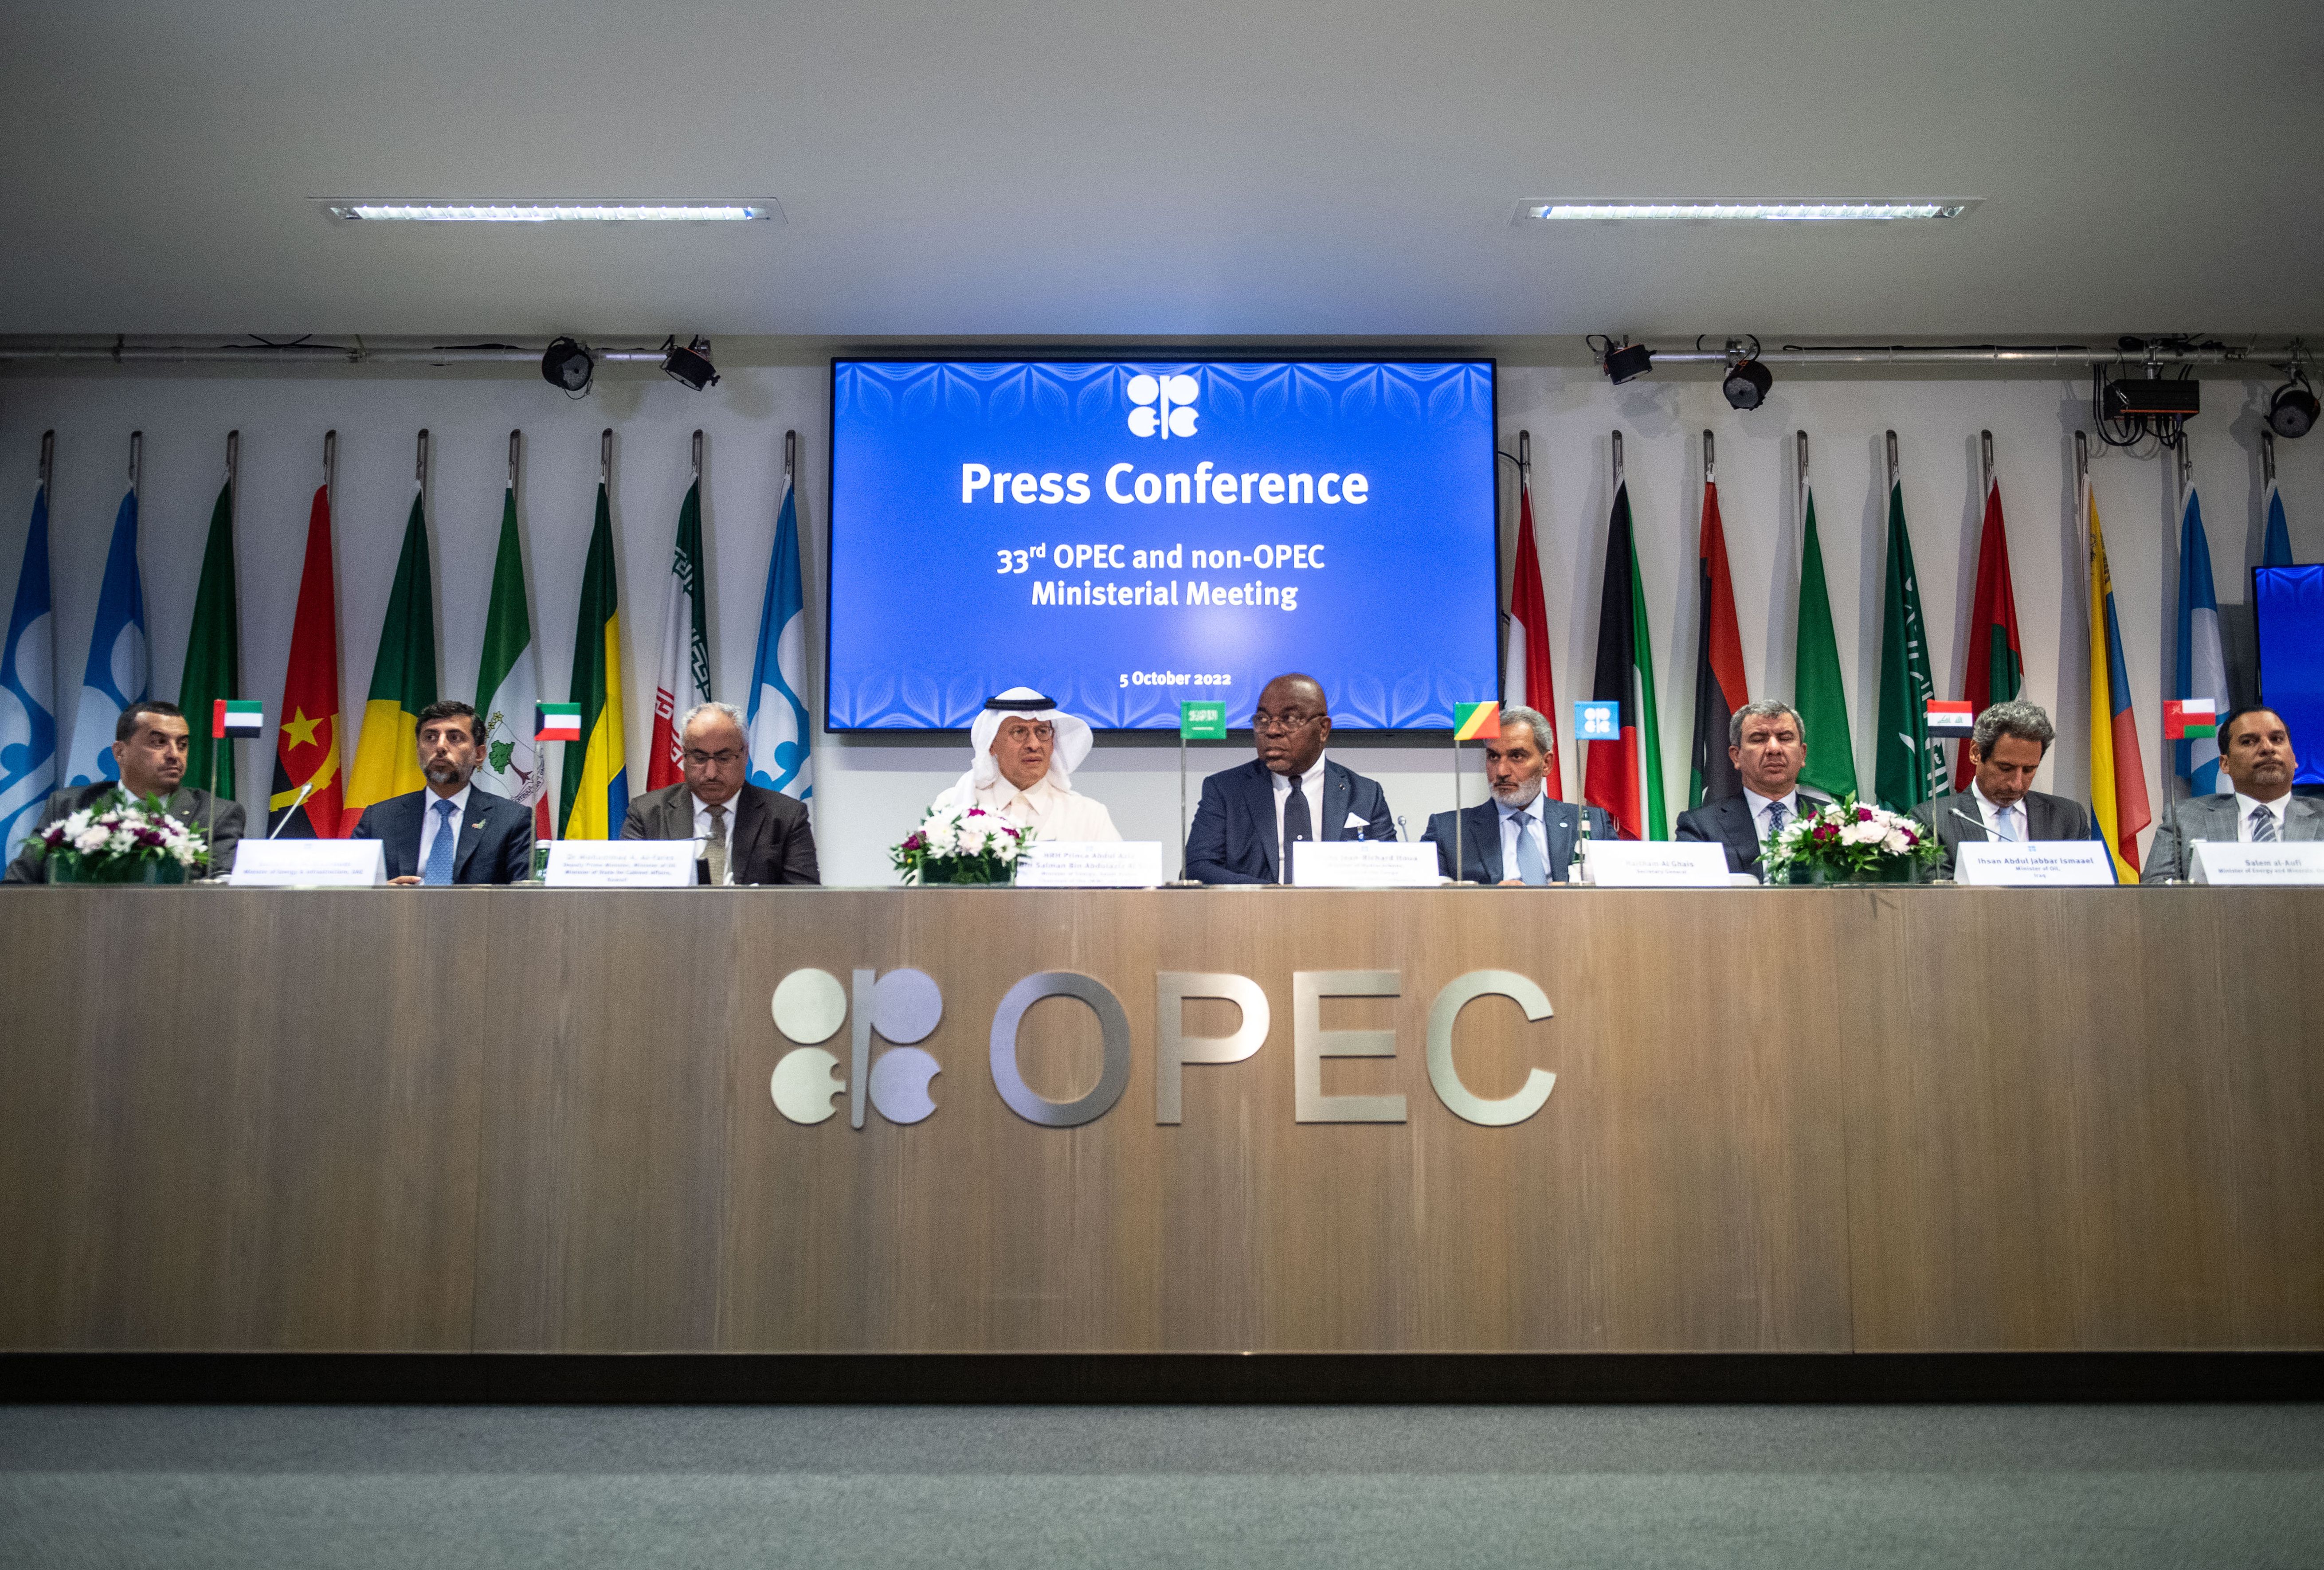 The leaders of the OPEC nations are seen during a recent conference, during which oil production was slashed